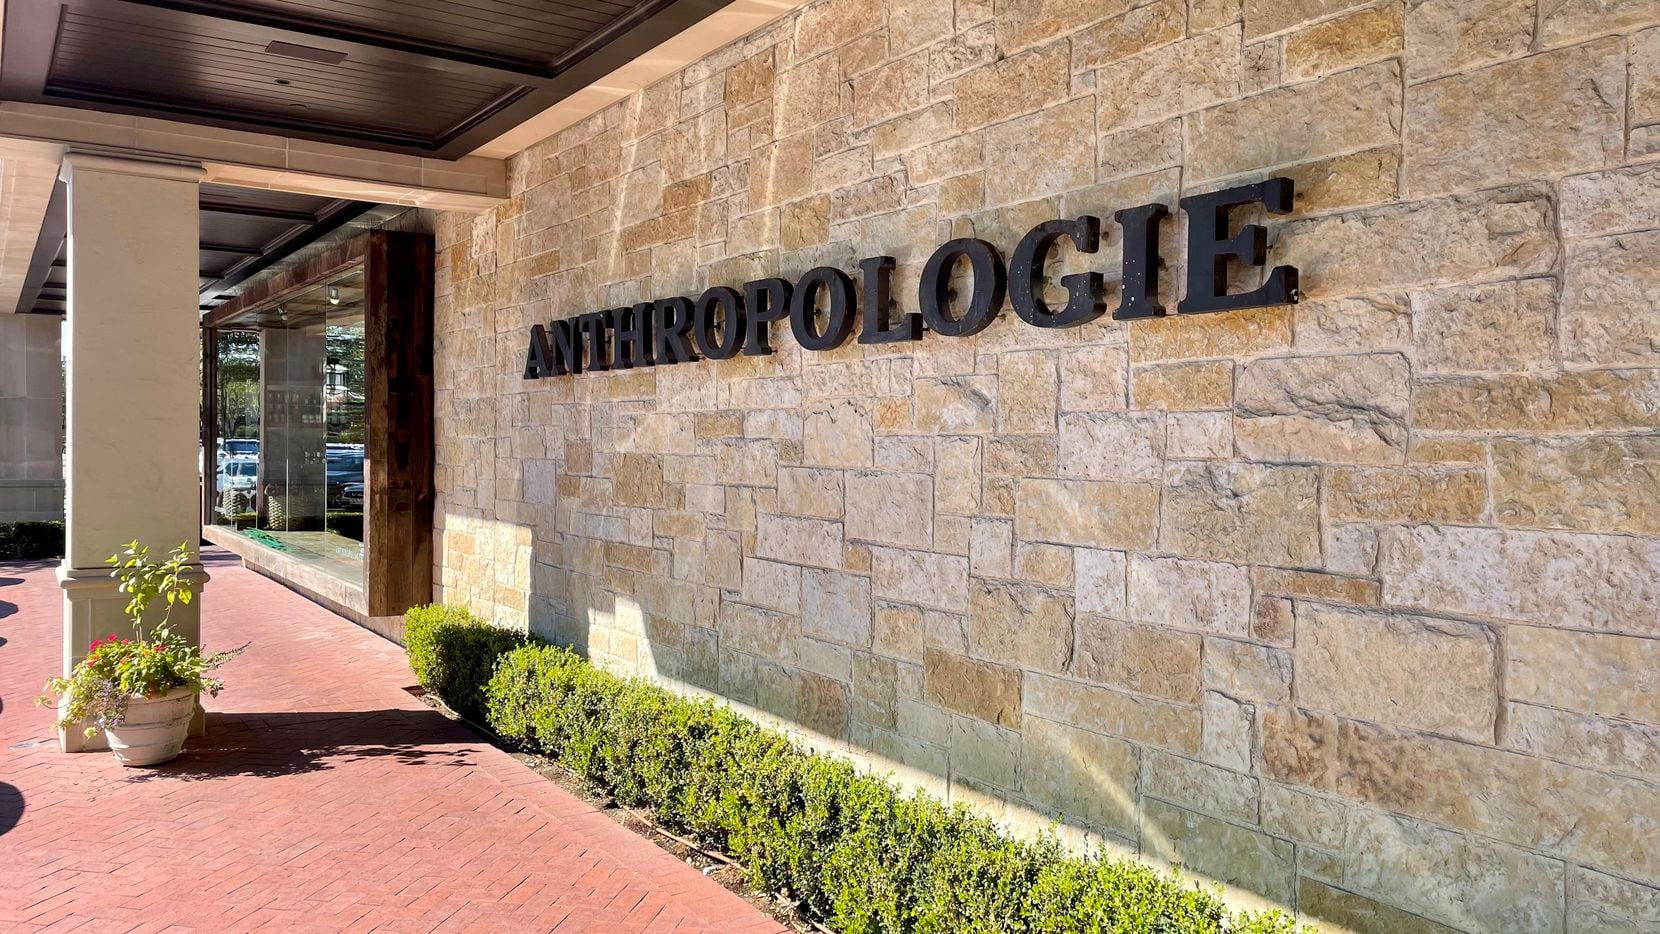 Anthropologie closed at Highland Park Village last week. The retailer is moving to Knox Street in March.